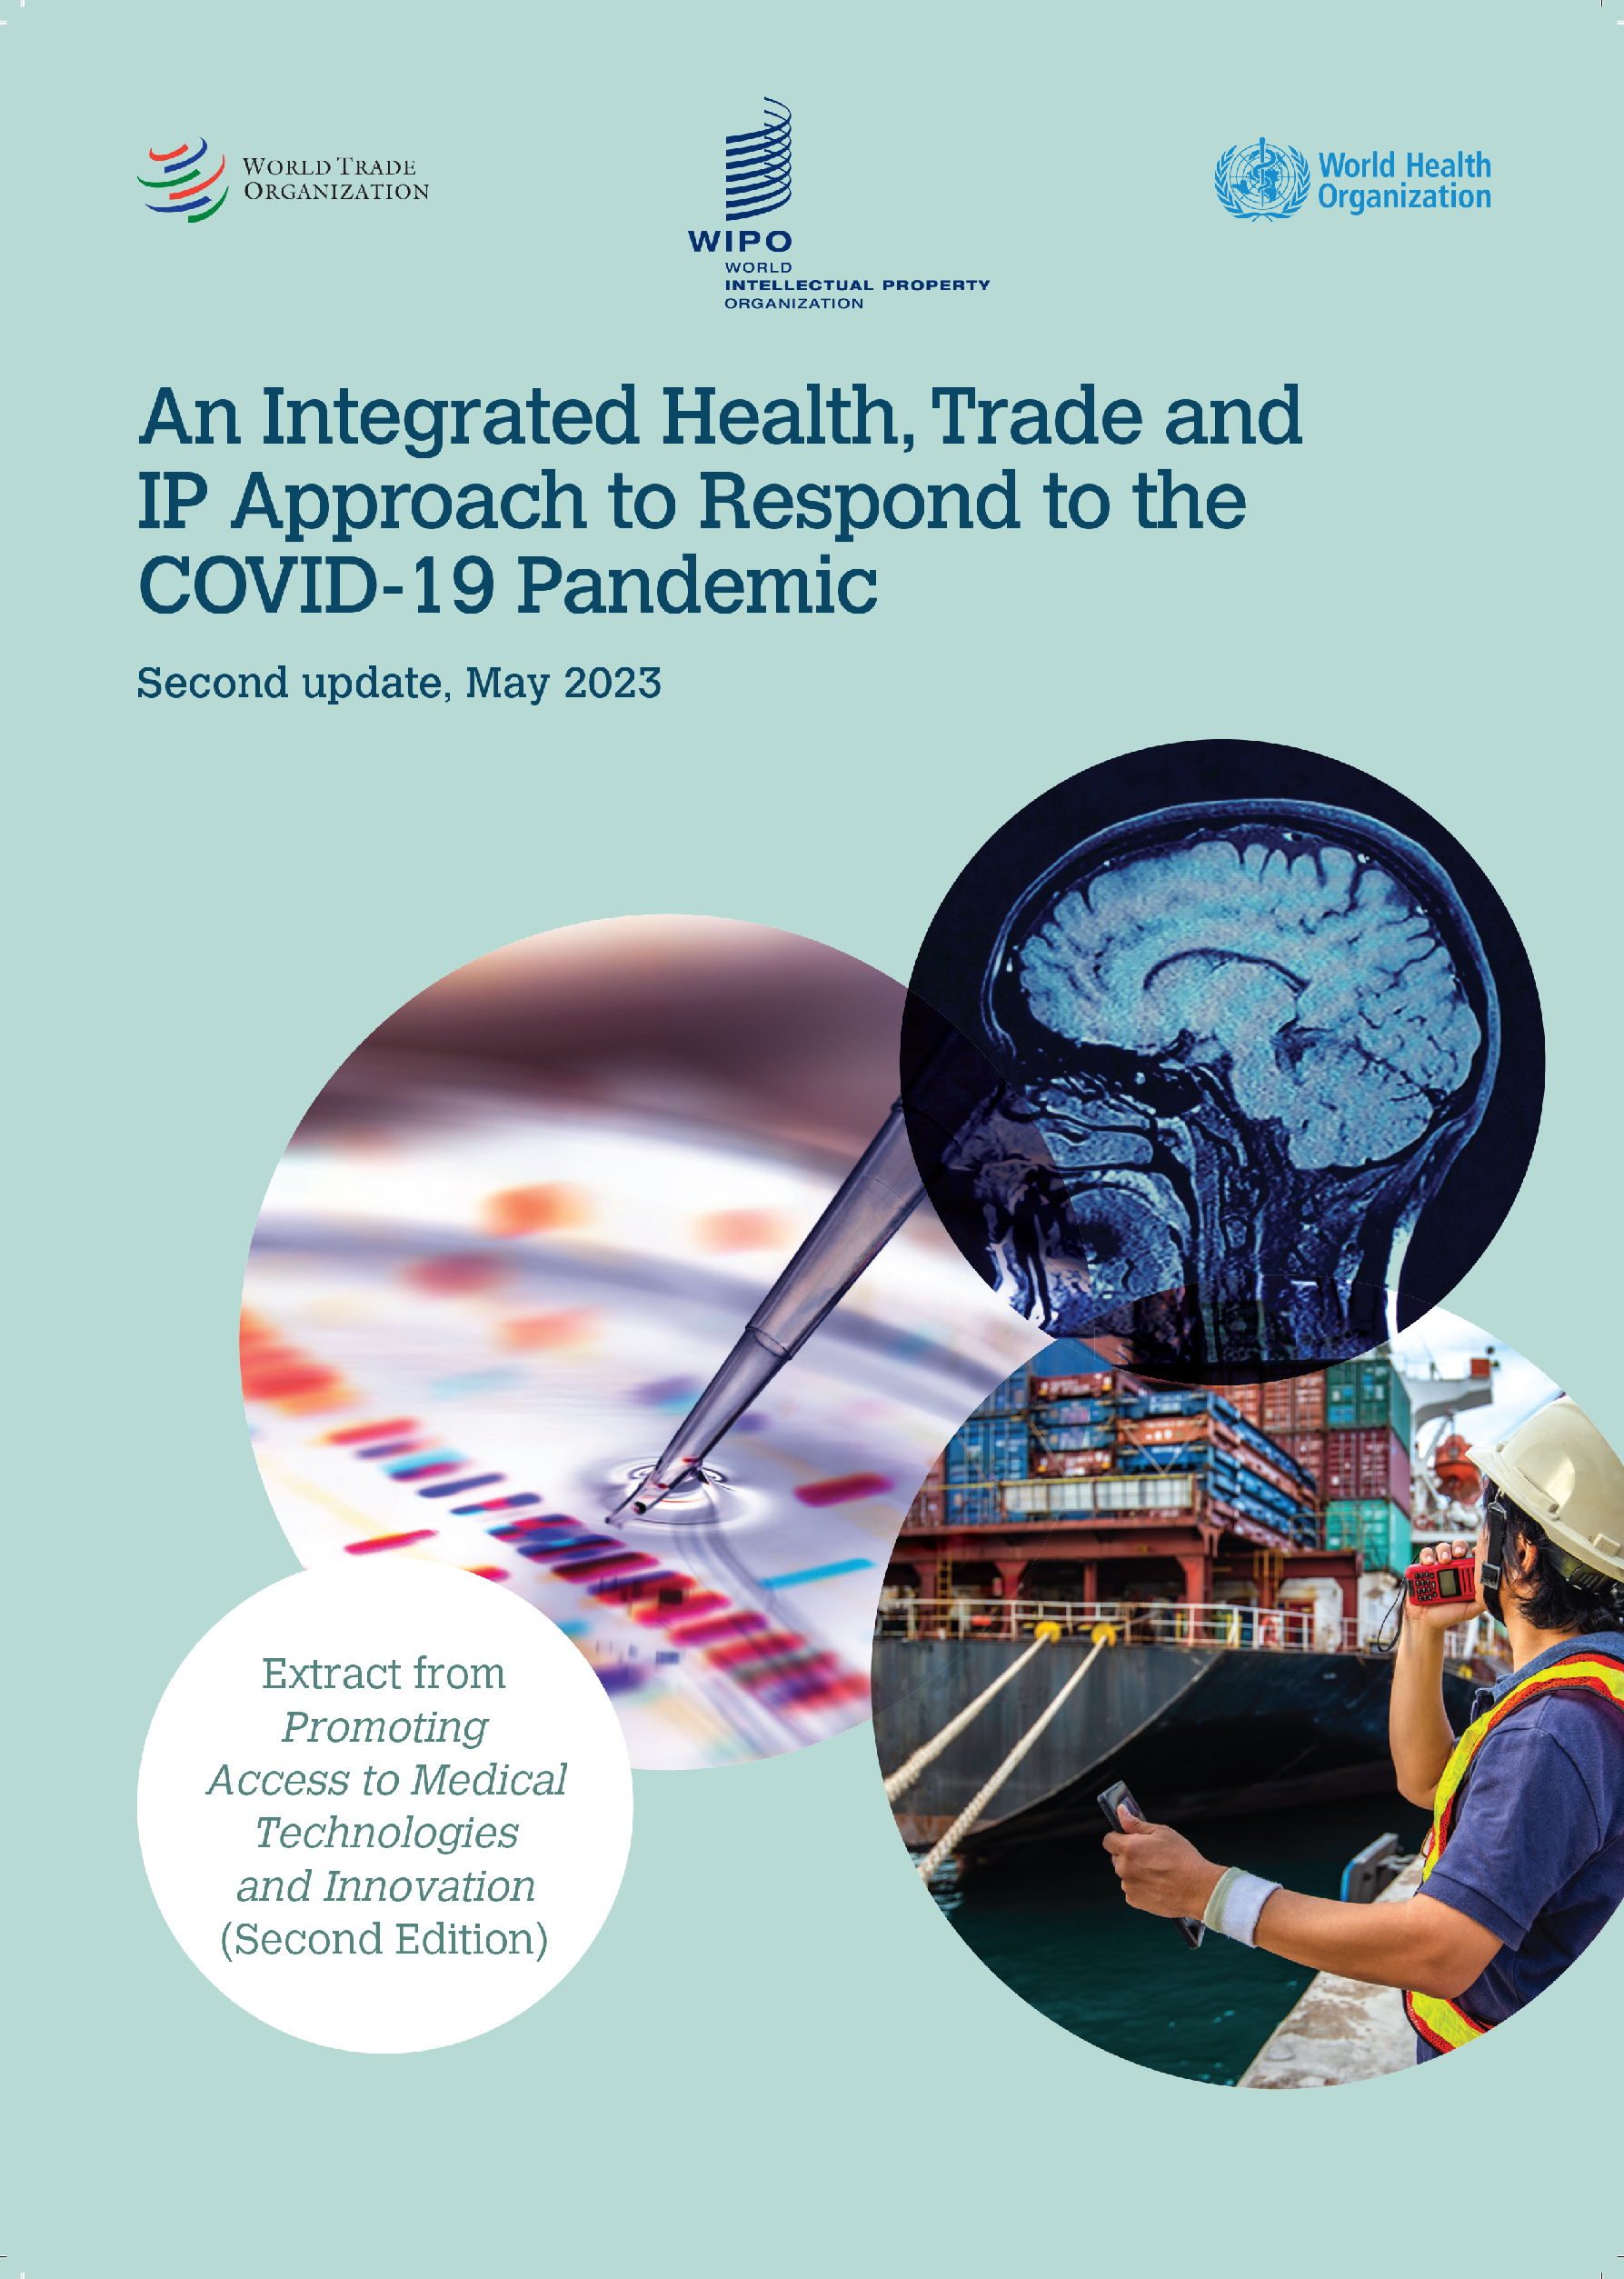 image of An Integrated Health, Trade and IP Approach to Respond to the COVID-19 Pandemic